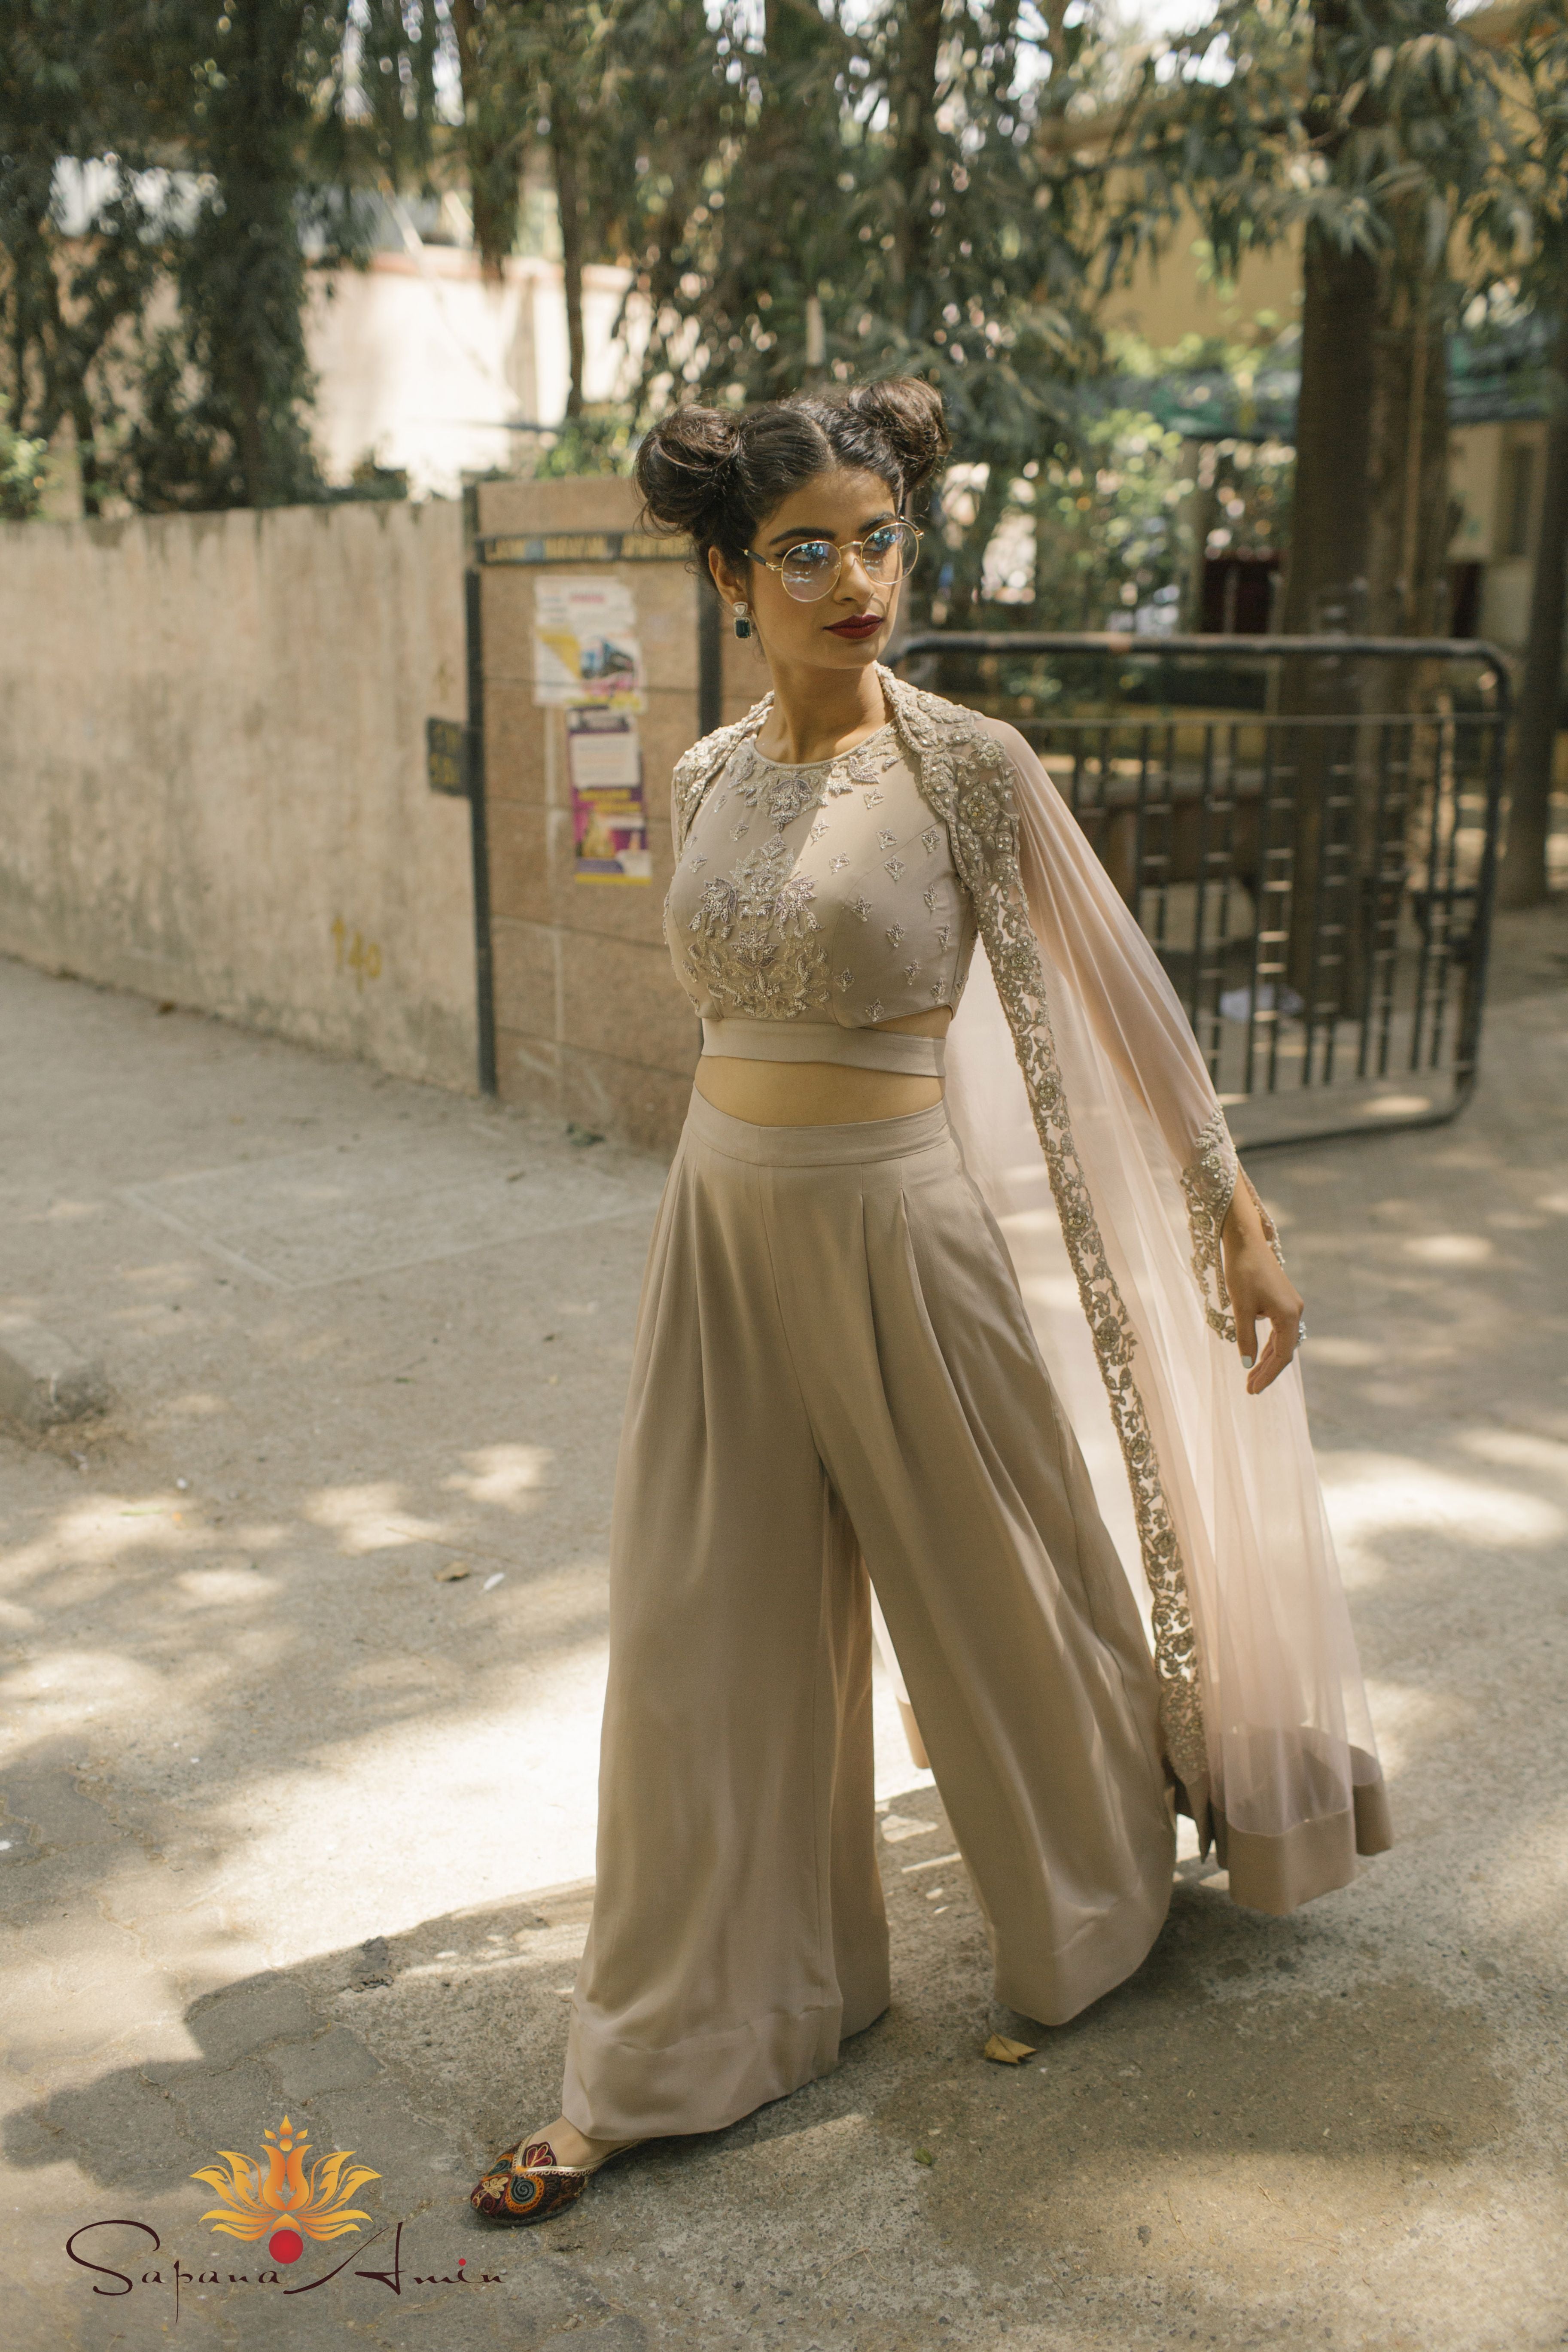 Stylish By Nature By Shalini Chopra | India Fashion Style Blog | Beauty |  Travel | Food | Bollywood: 5 Style Tips On How To Wear Wide Leg Palazzo  Pants